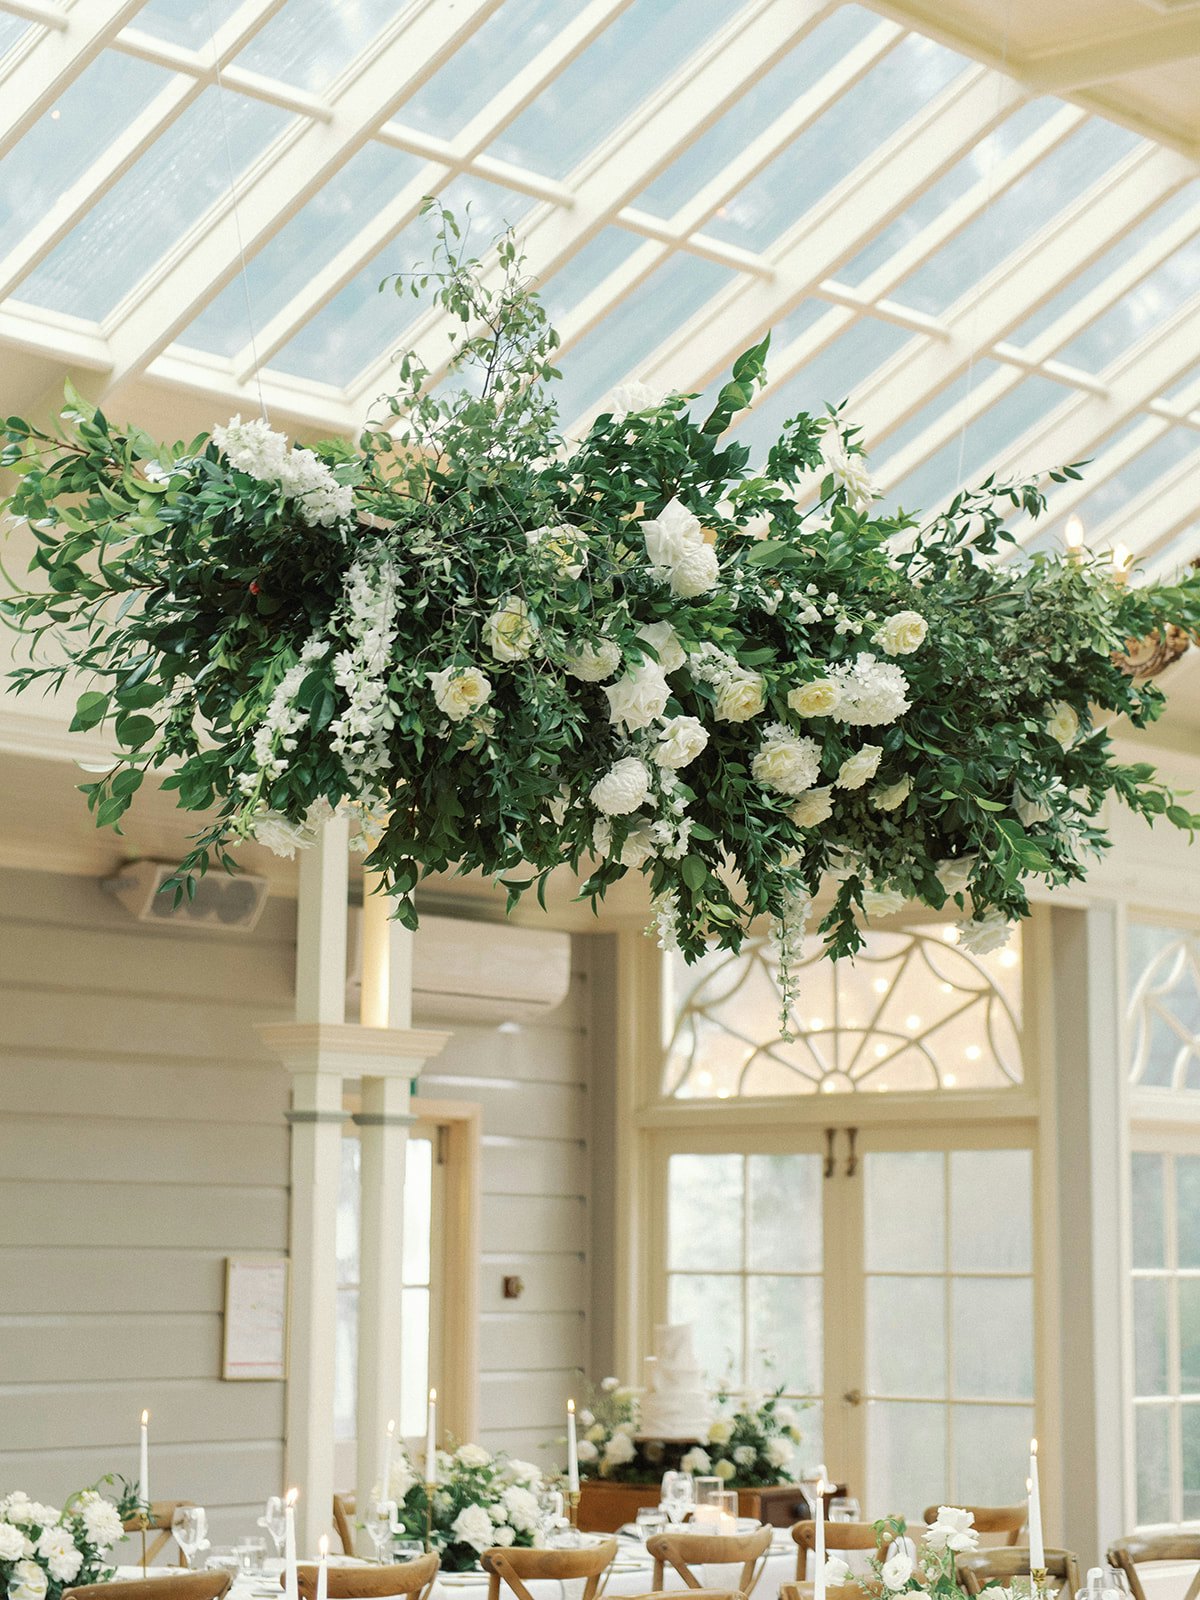 Hanging floral display with white roses